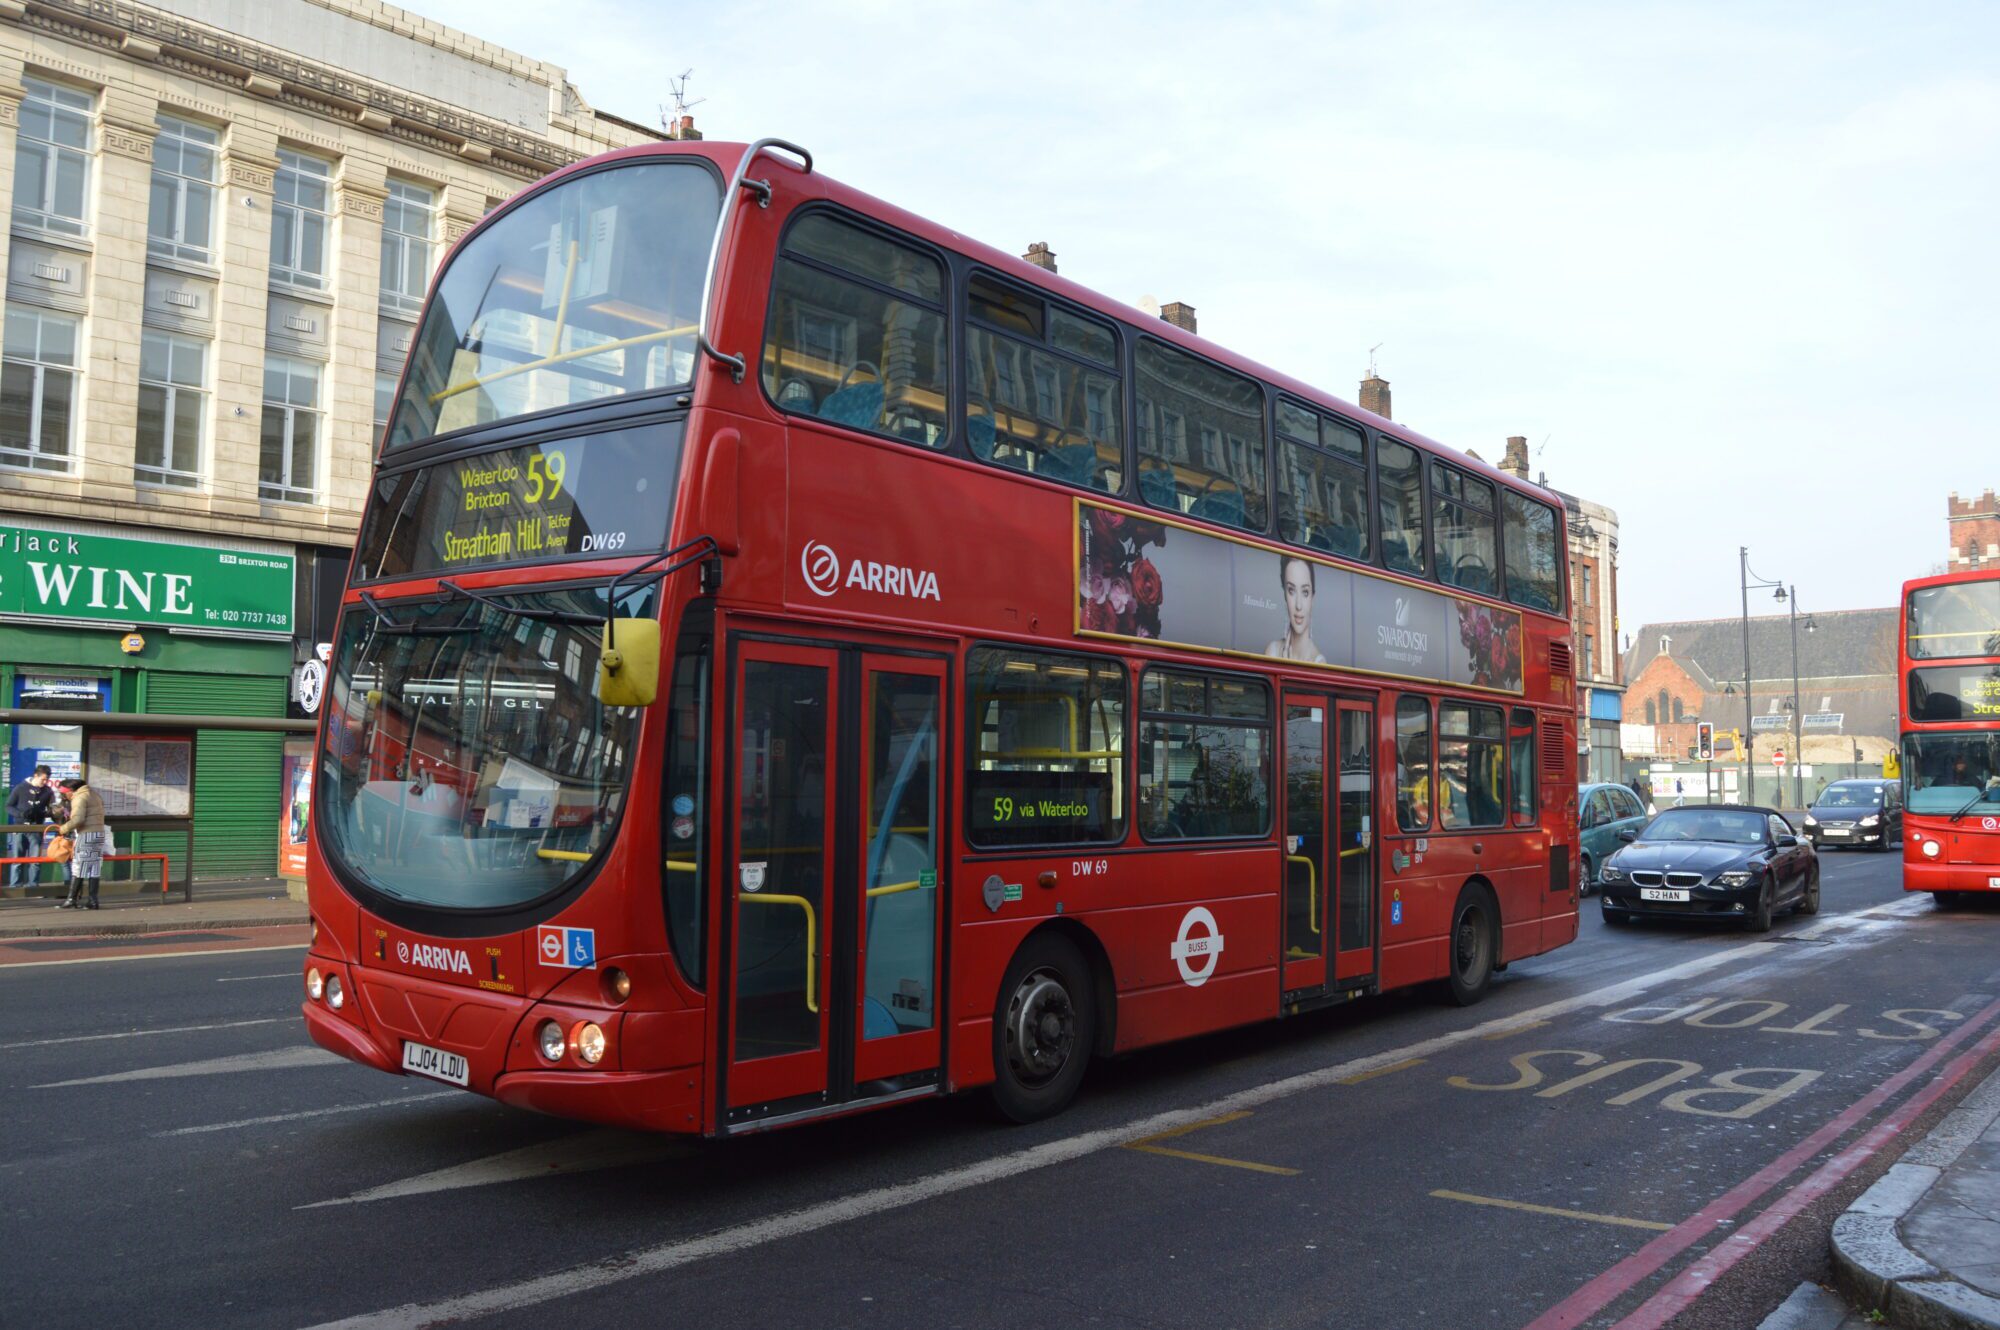 More bus strikes planned for next week – South London News